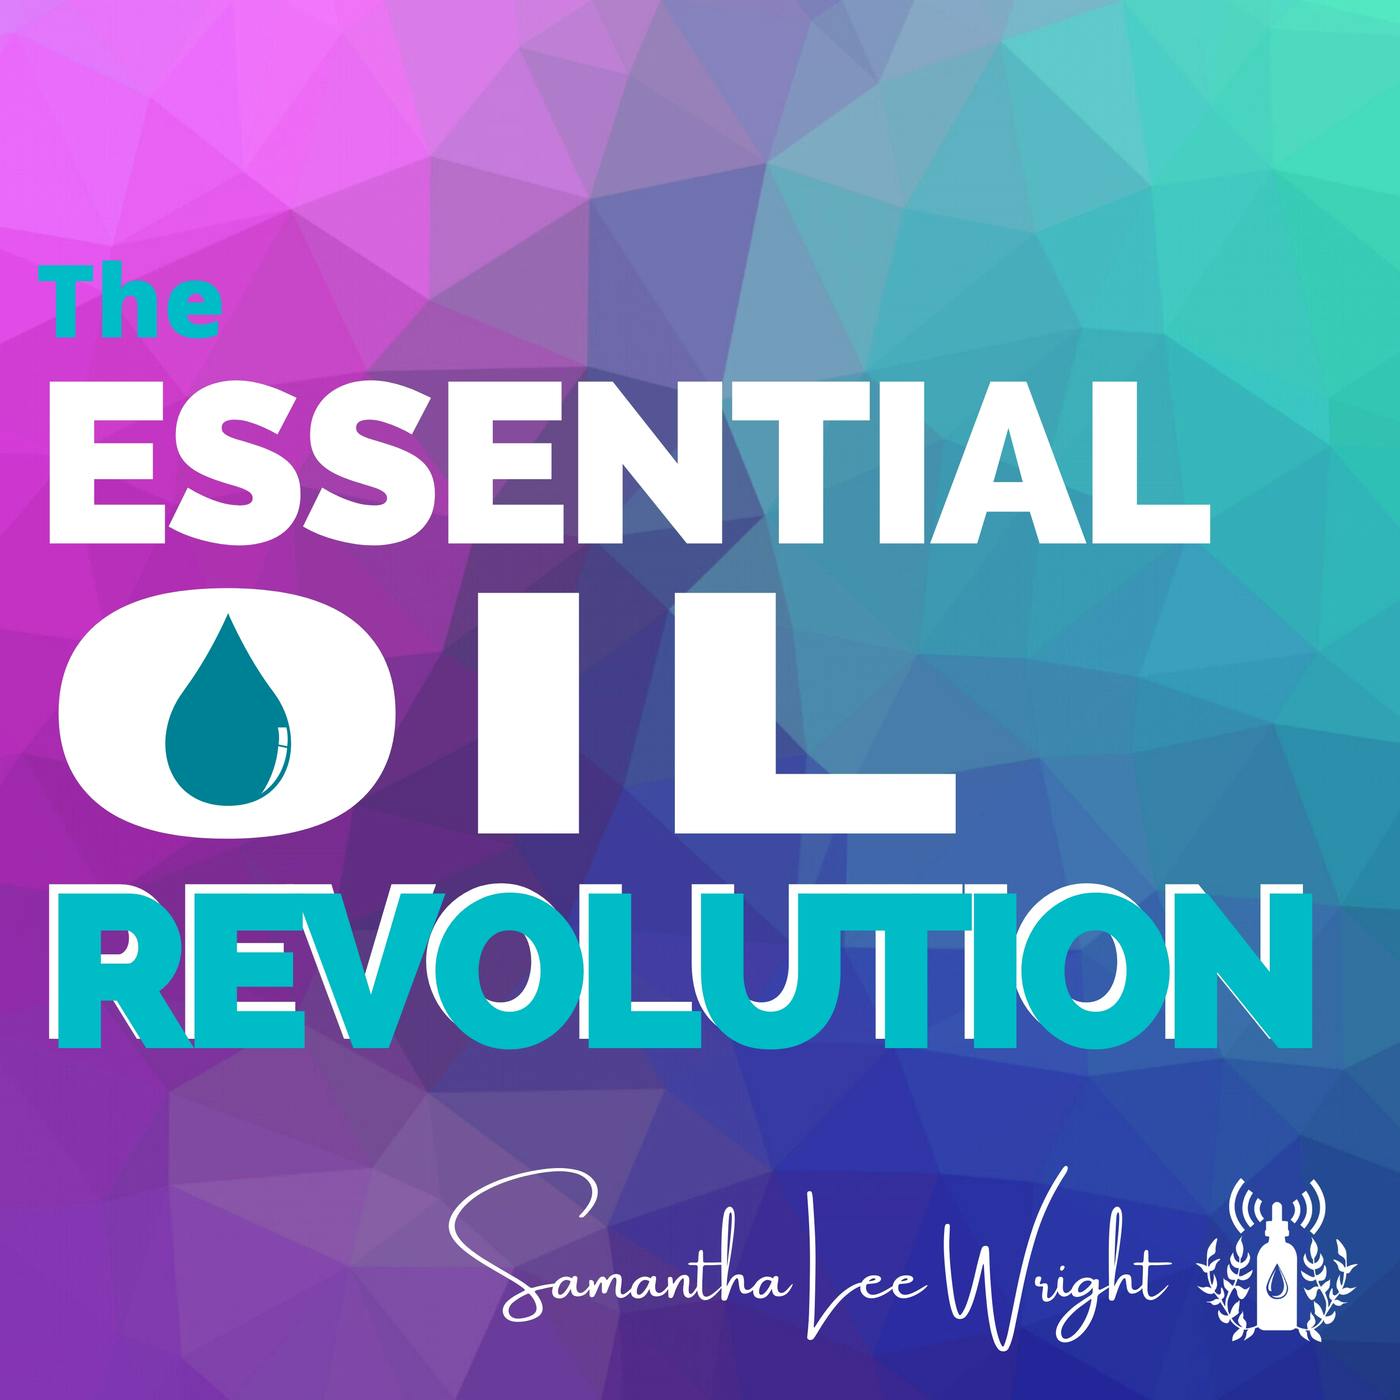 221: Making Your Own Soap with Essential Oils